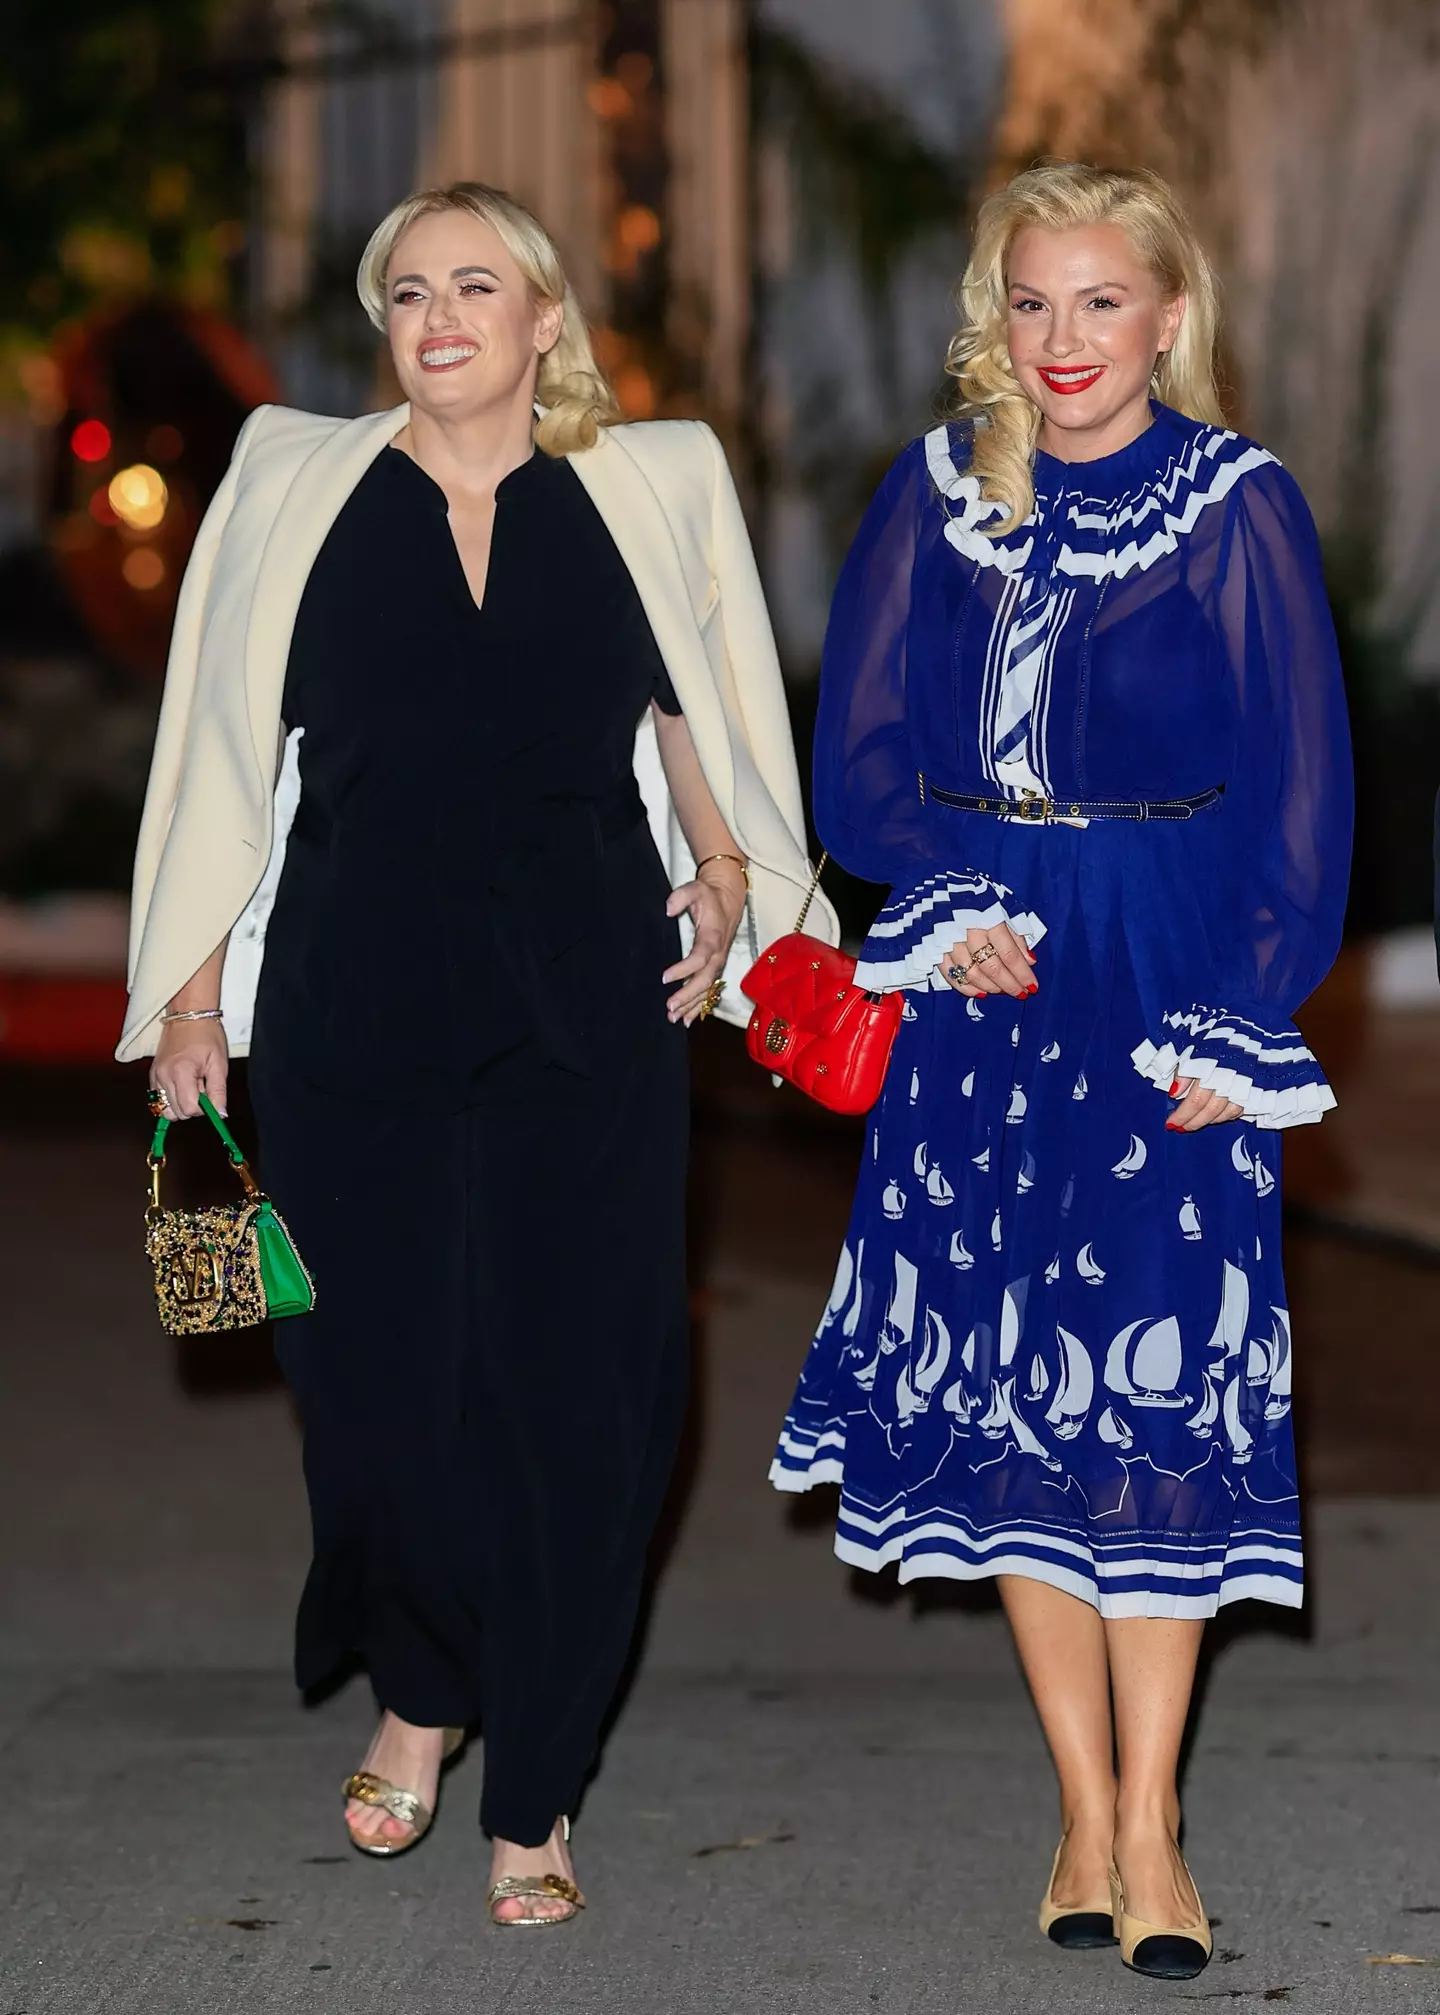 Rebel Wilson and Ramona Agruma are engaged to be married. (Rachpoot/Bauer-Griffin/Getty Images) 